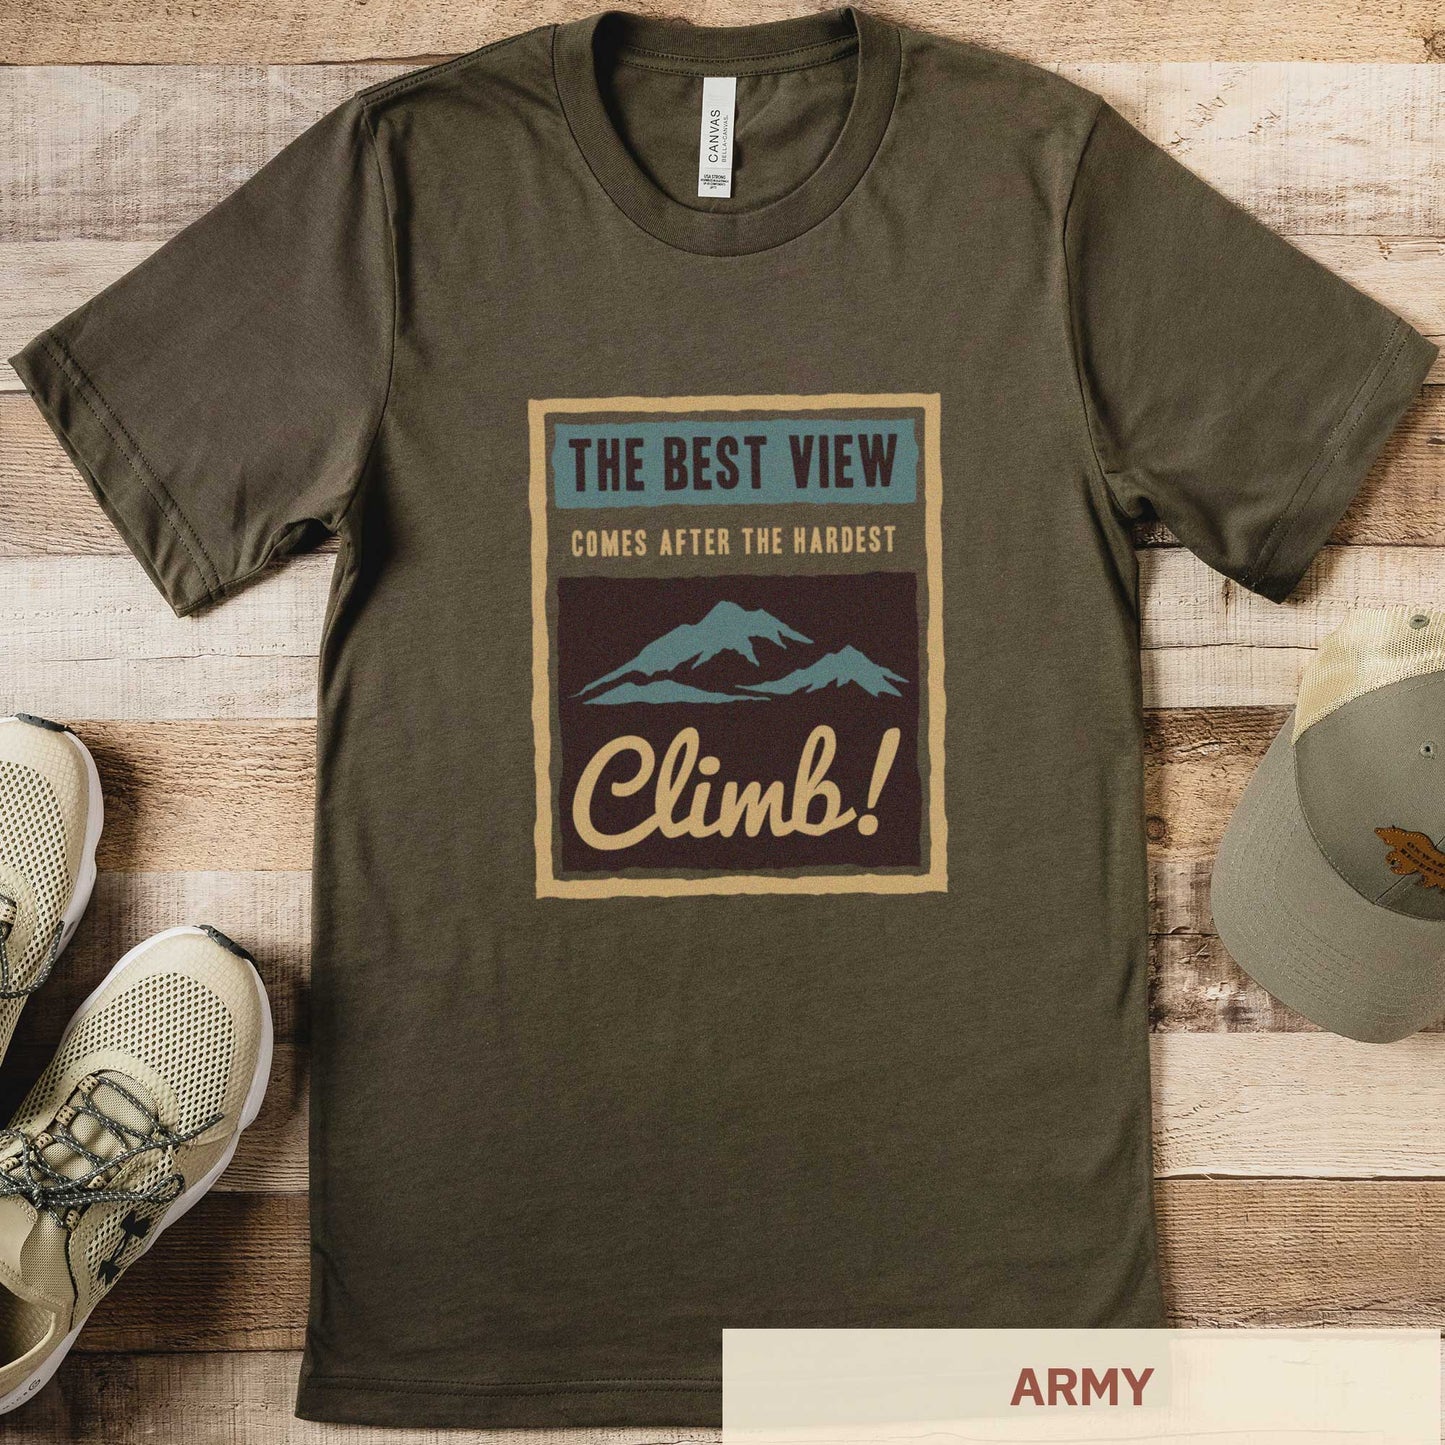 An army green Bella Canvas t-shirt that features mountains and the words the best view comes after the hardest climb.